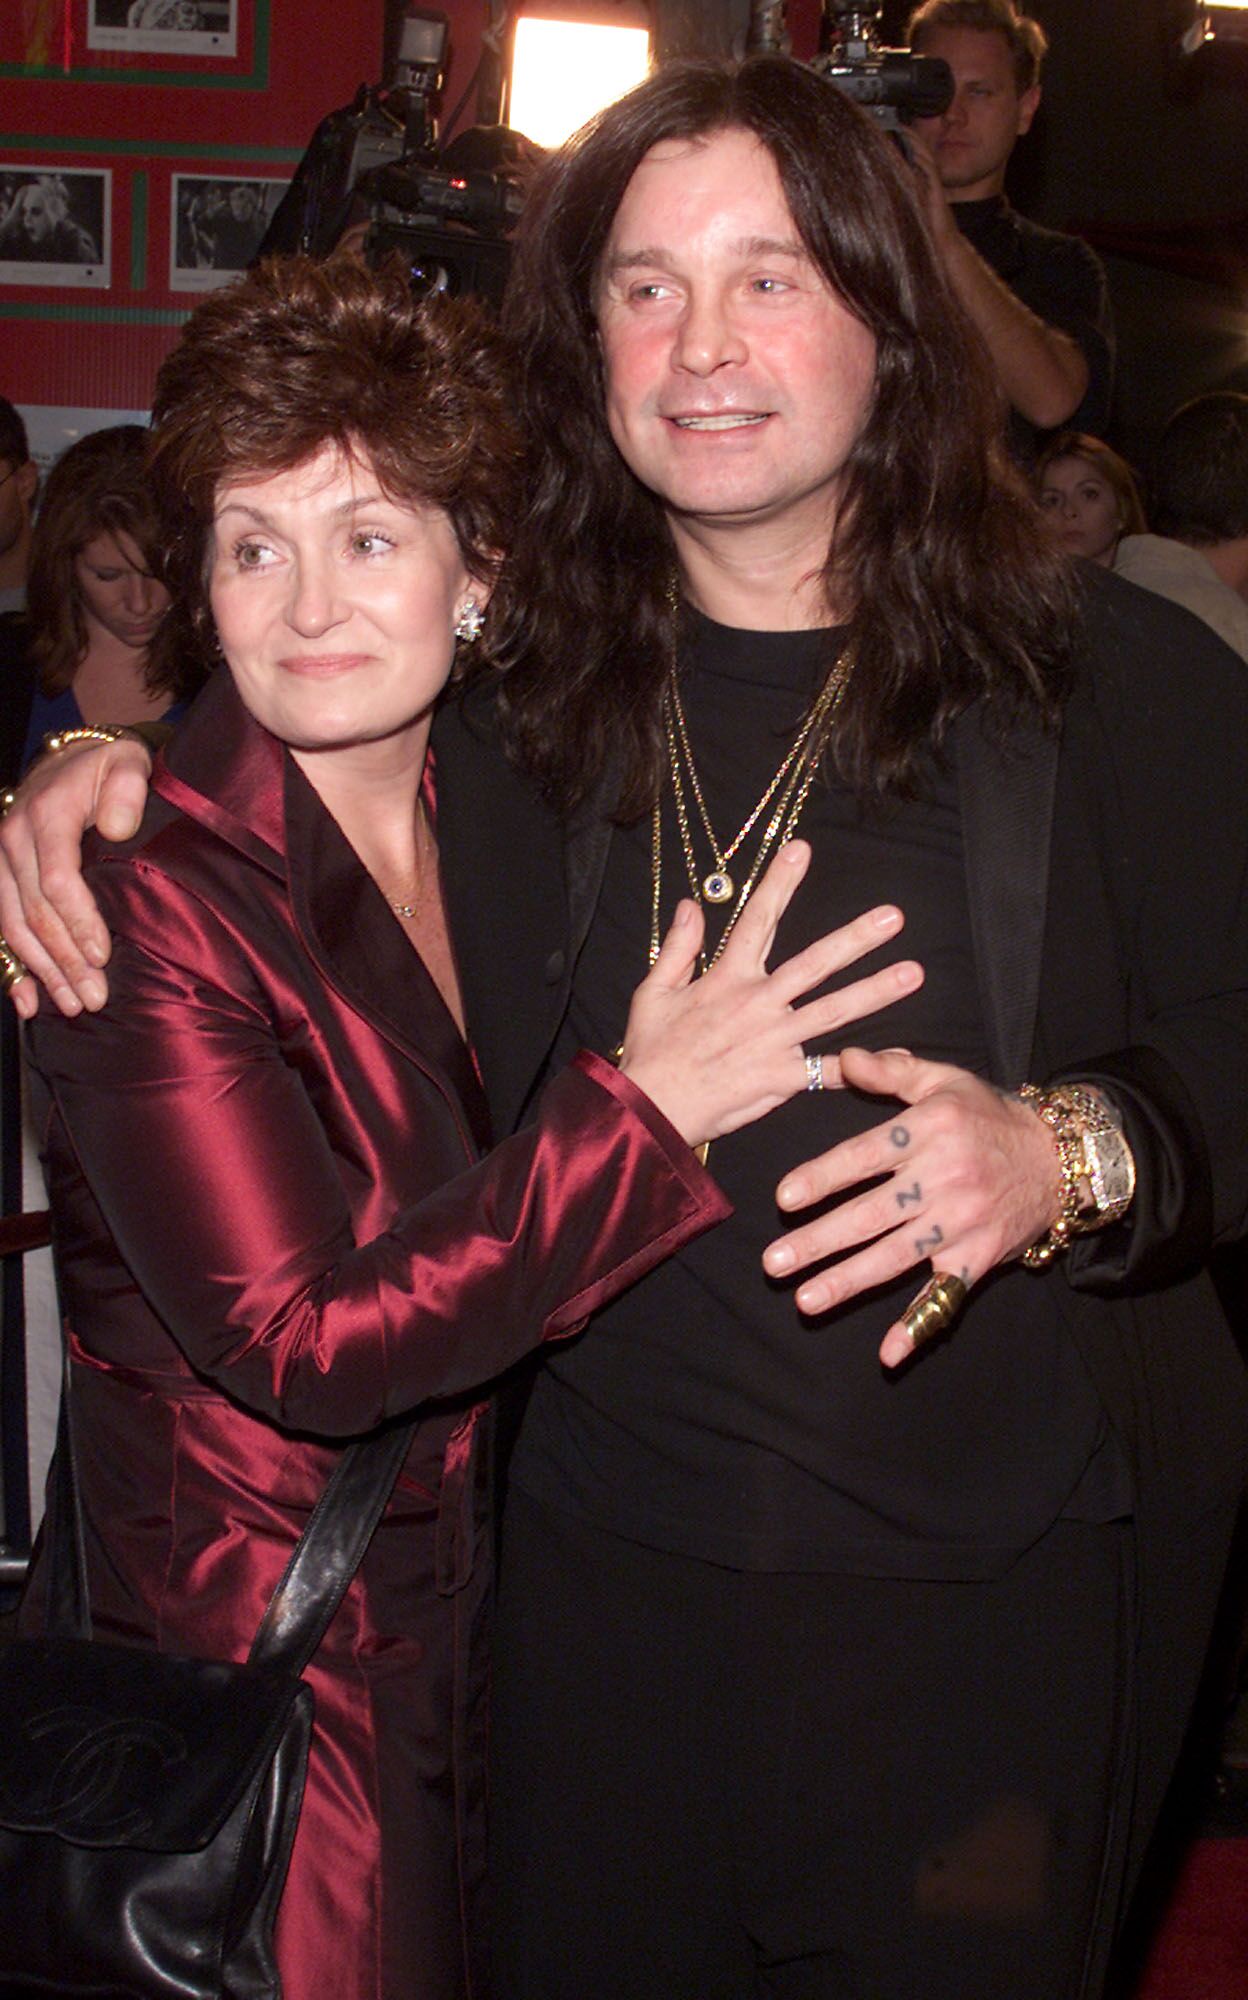 Ozzy Osbourne and his wife Sharon at the premiere of 'Little Nicky' in Los Angeles in 2000 | Source: Getty Images